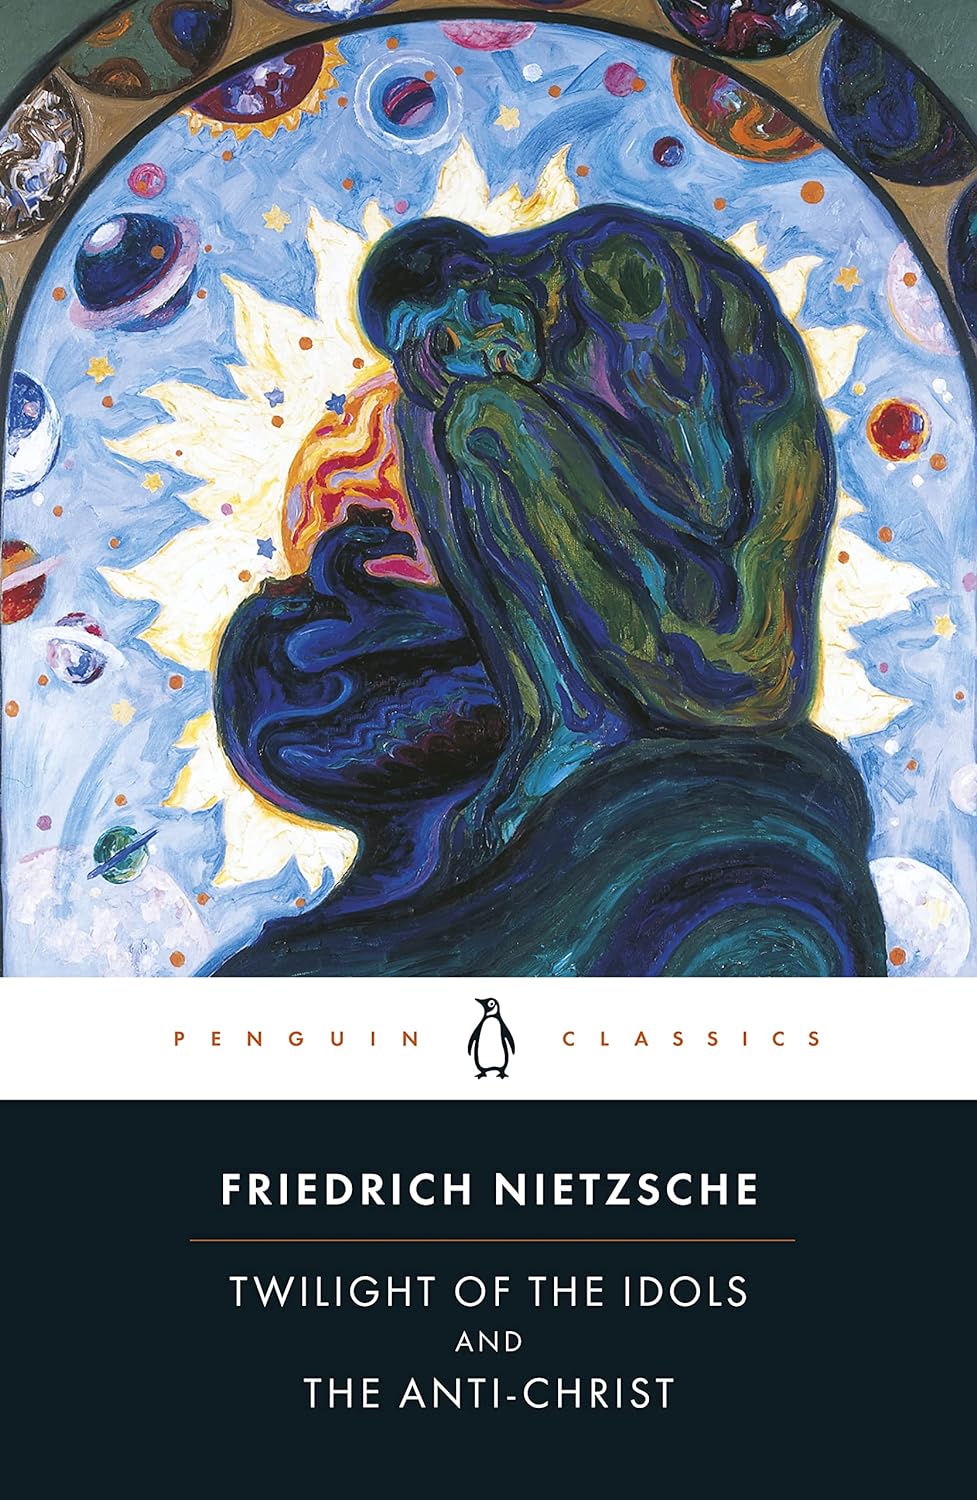 Twilight of the Idols and The Anti-Christ by Friedrich Nietzsche